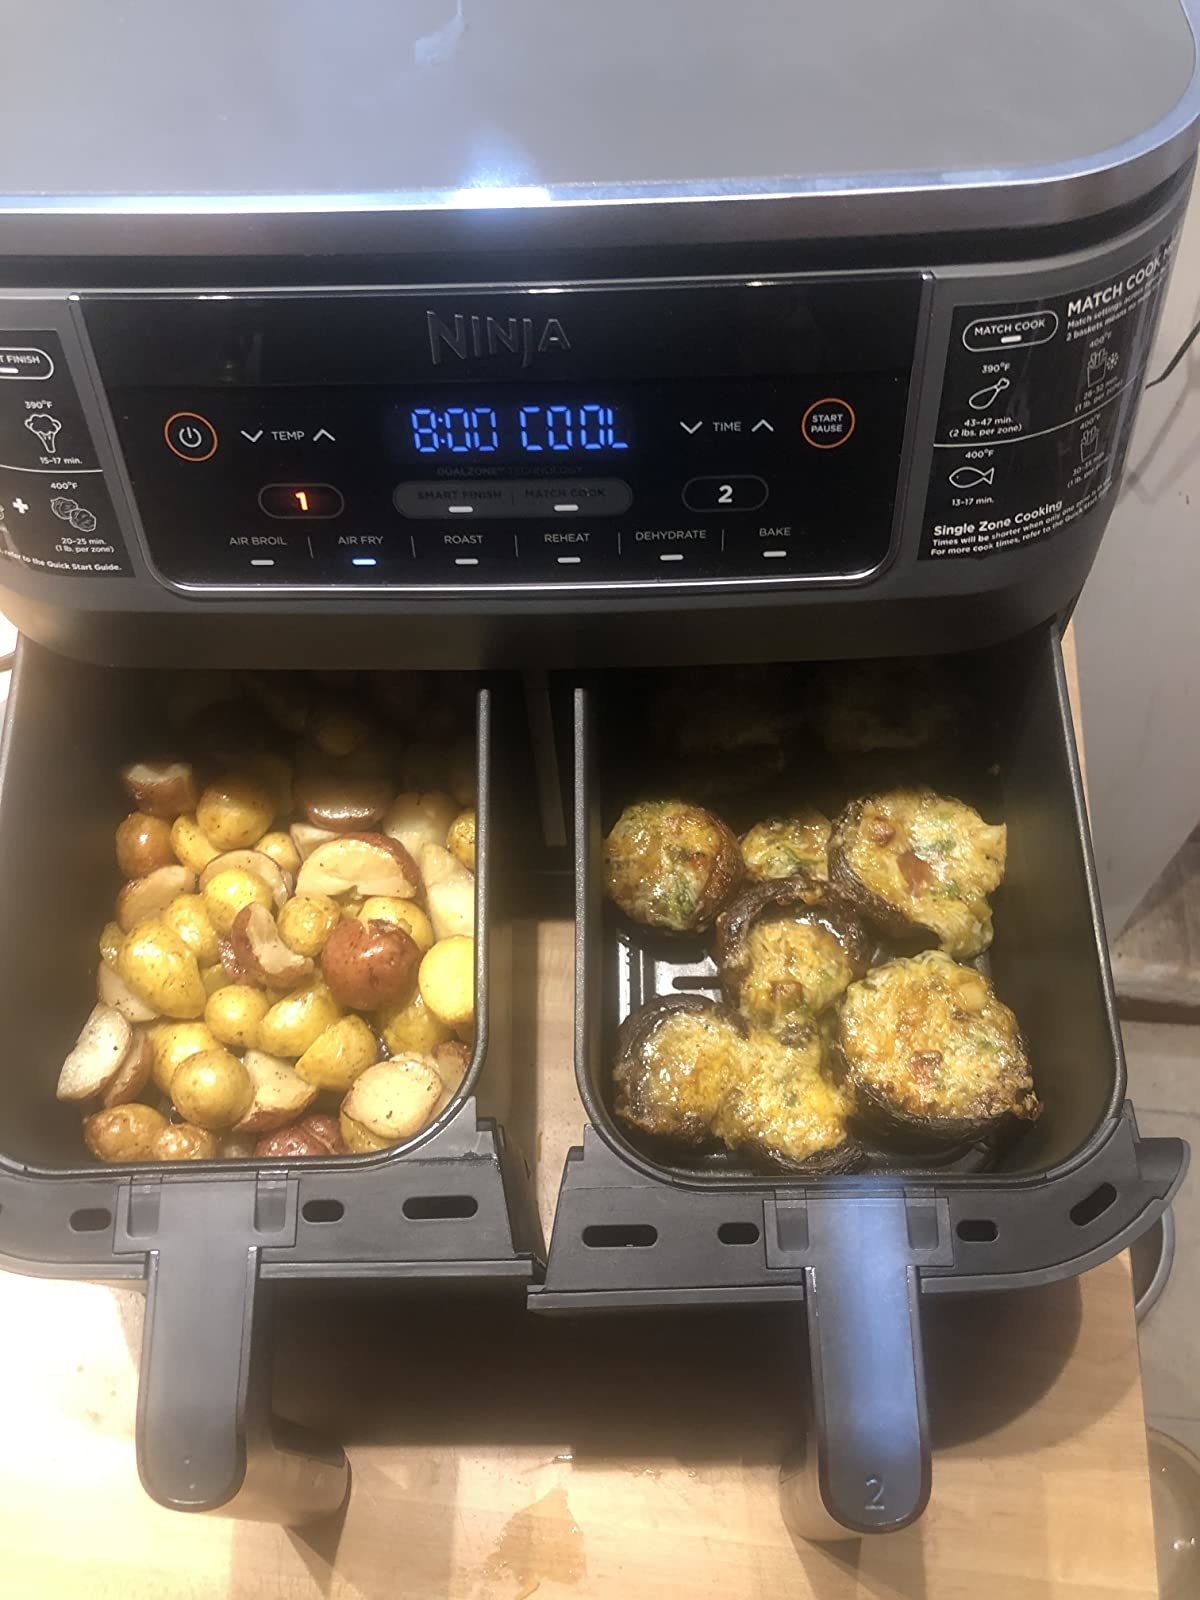 A reviewer has both drawers of the air fryer open, the left with potatoes and the right with stuffed mushrooms